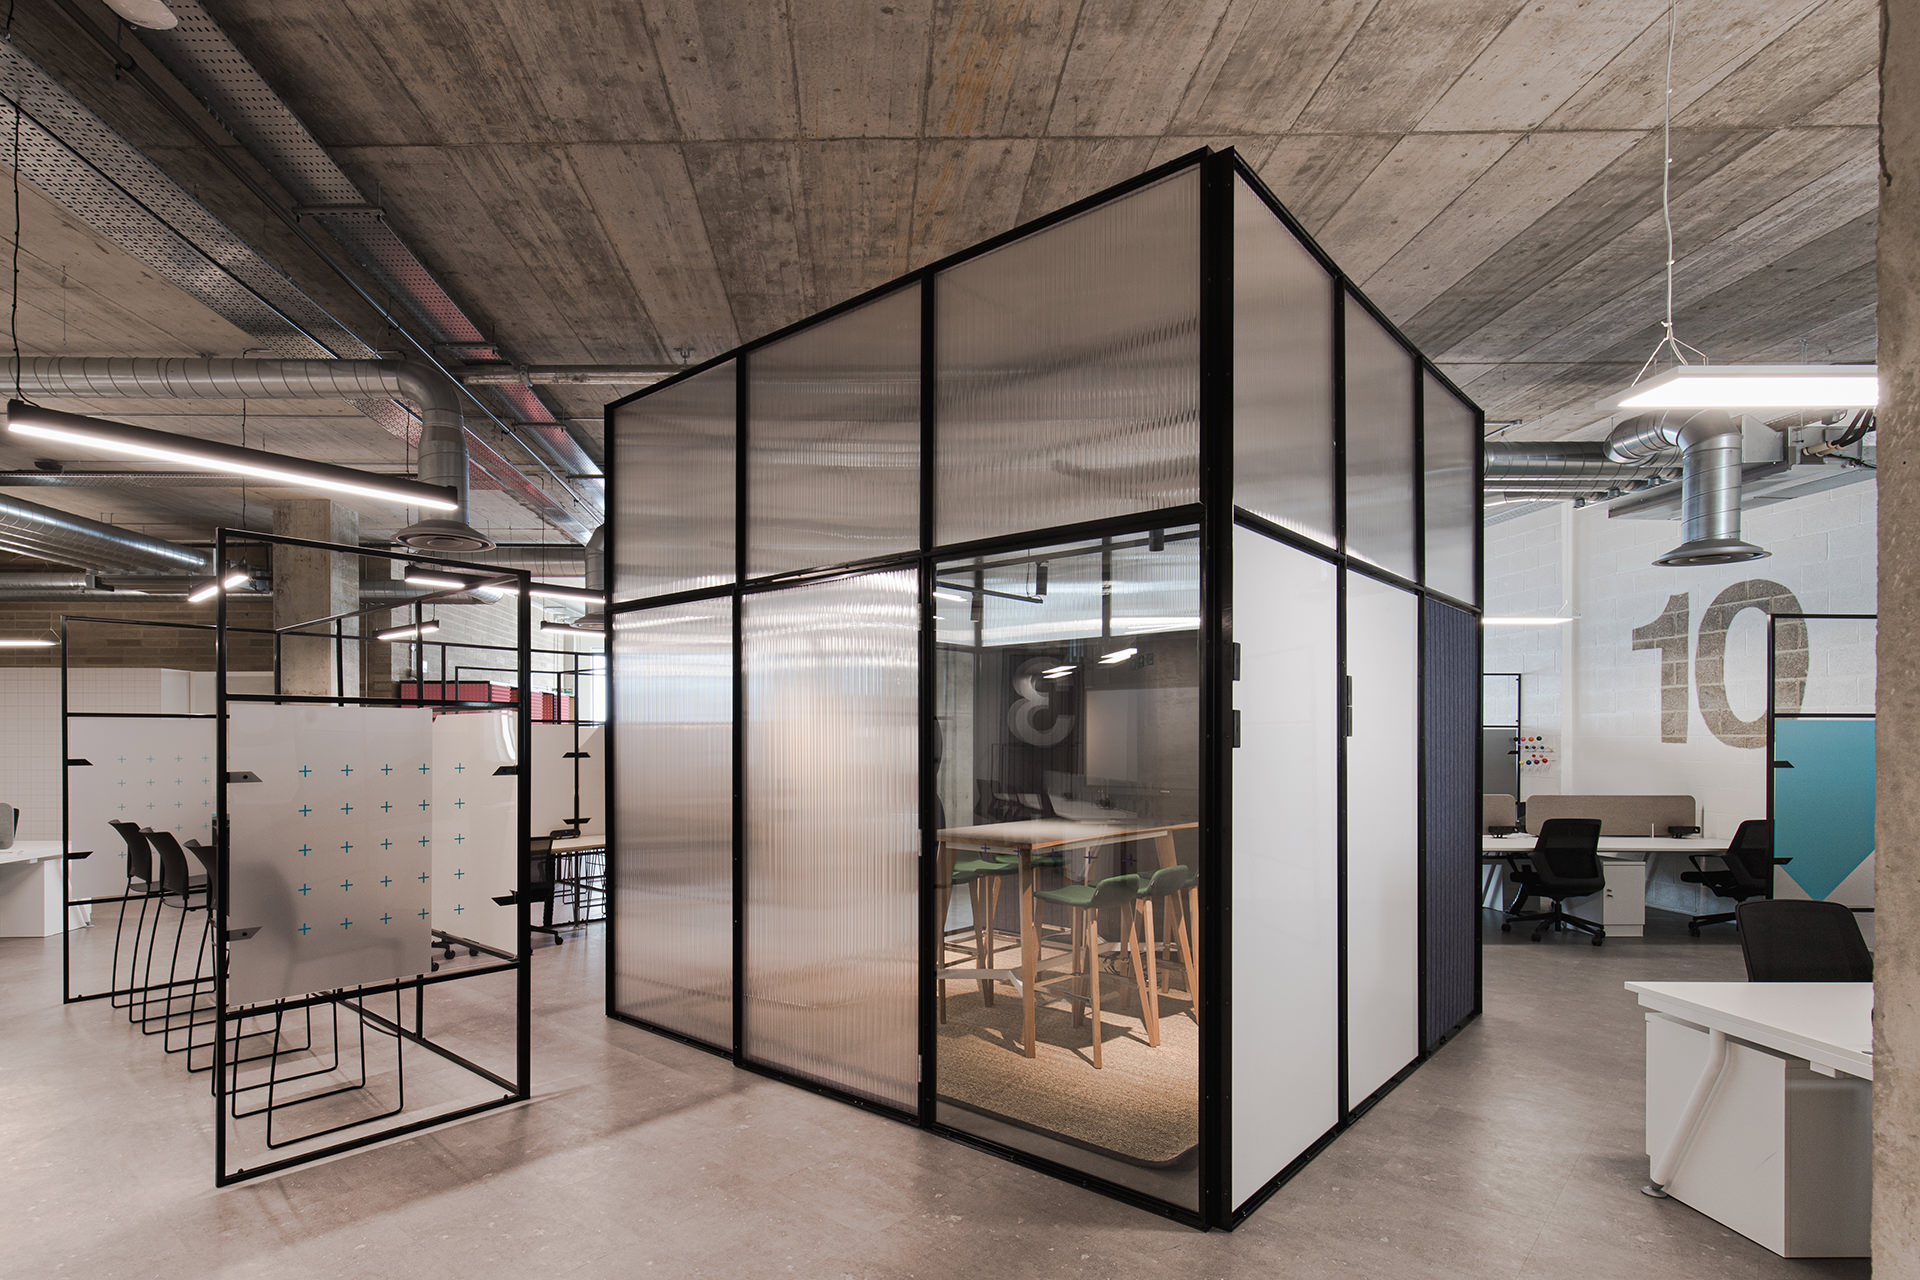 An internal view of an industrial designed communal workplace